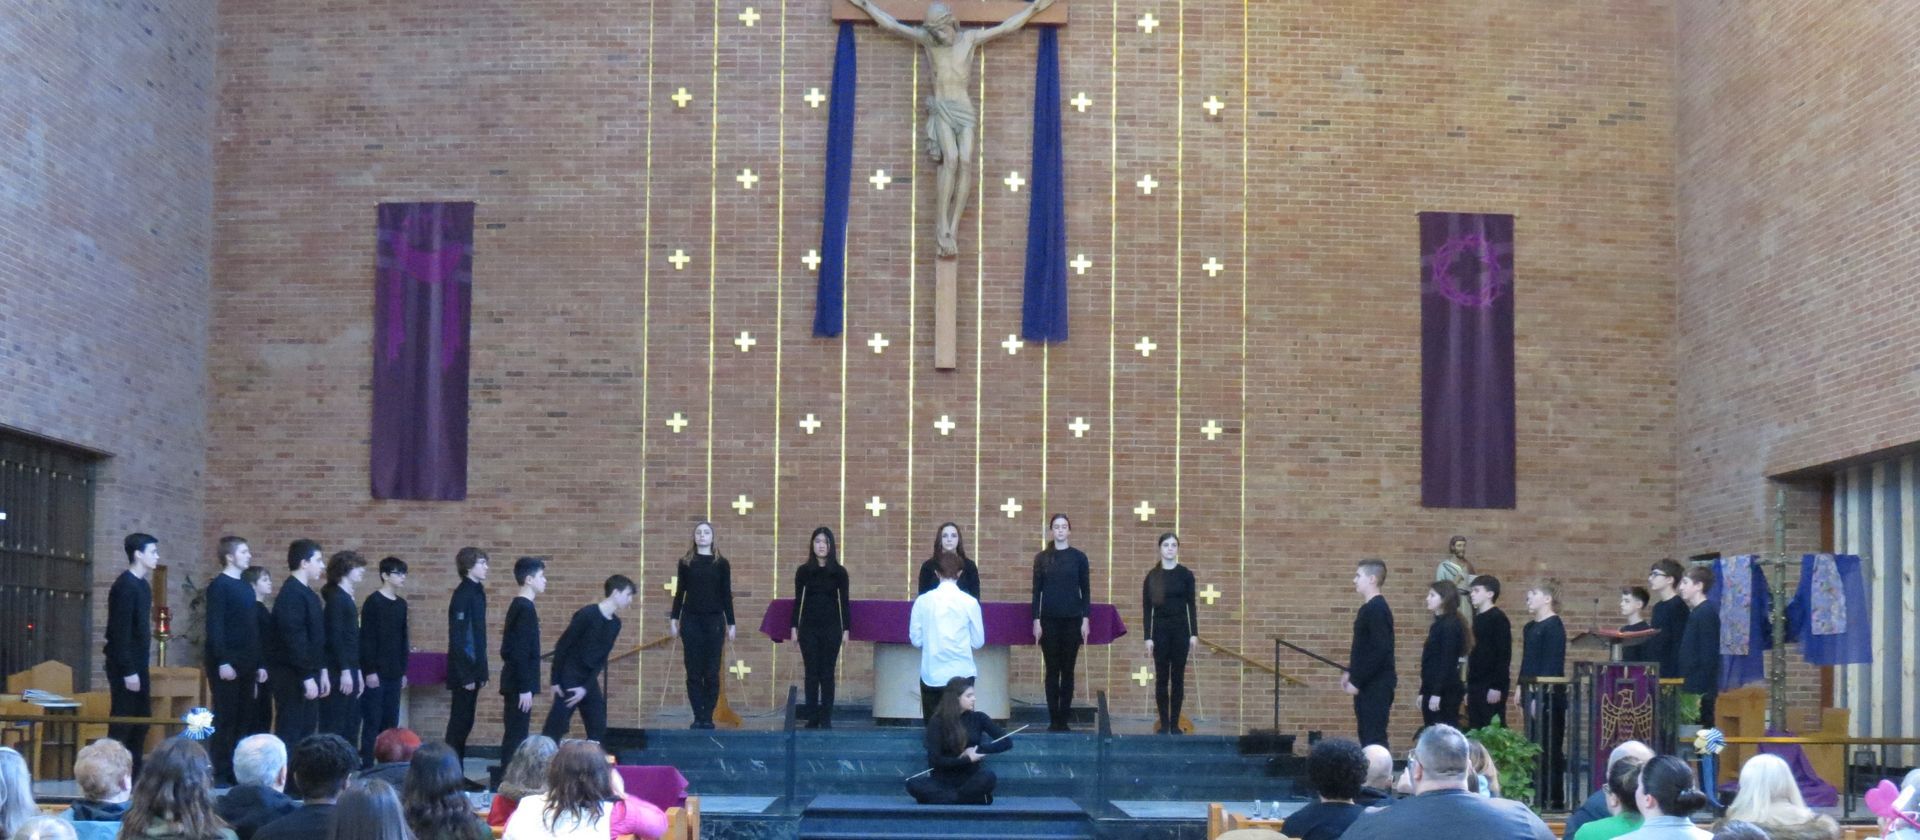 A group of people standing in front of a crucifix in a church